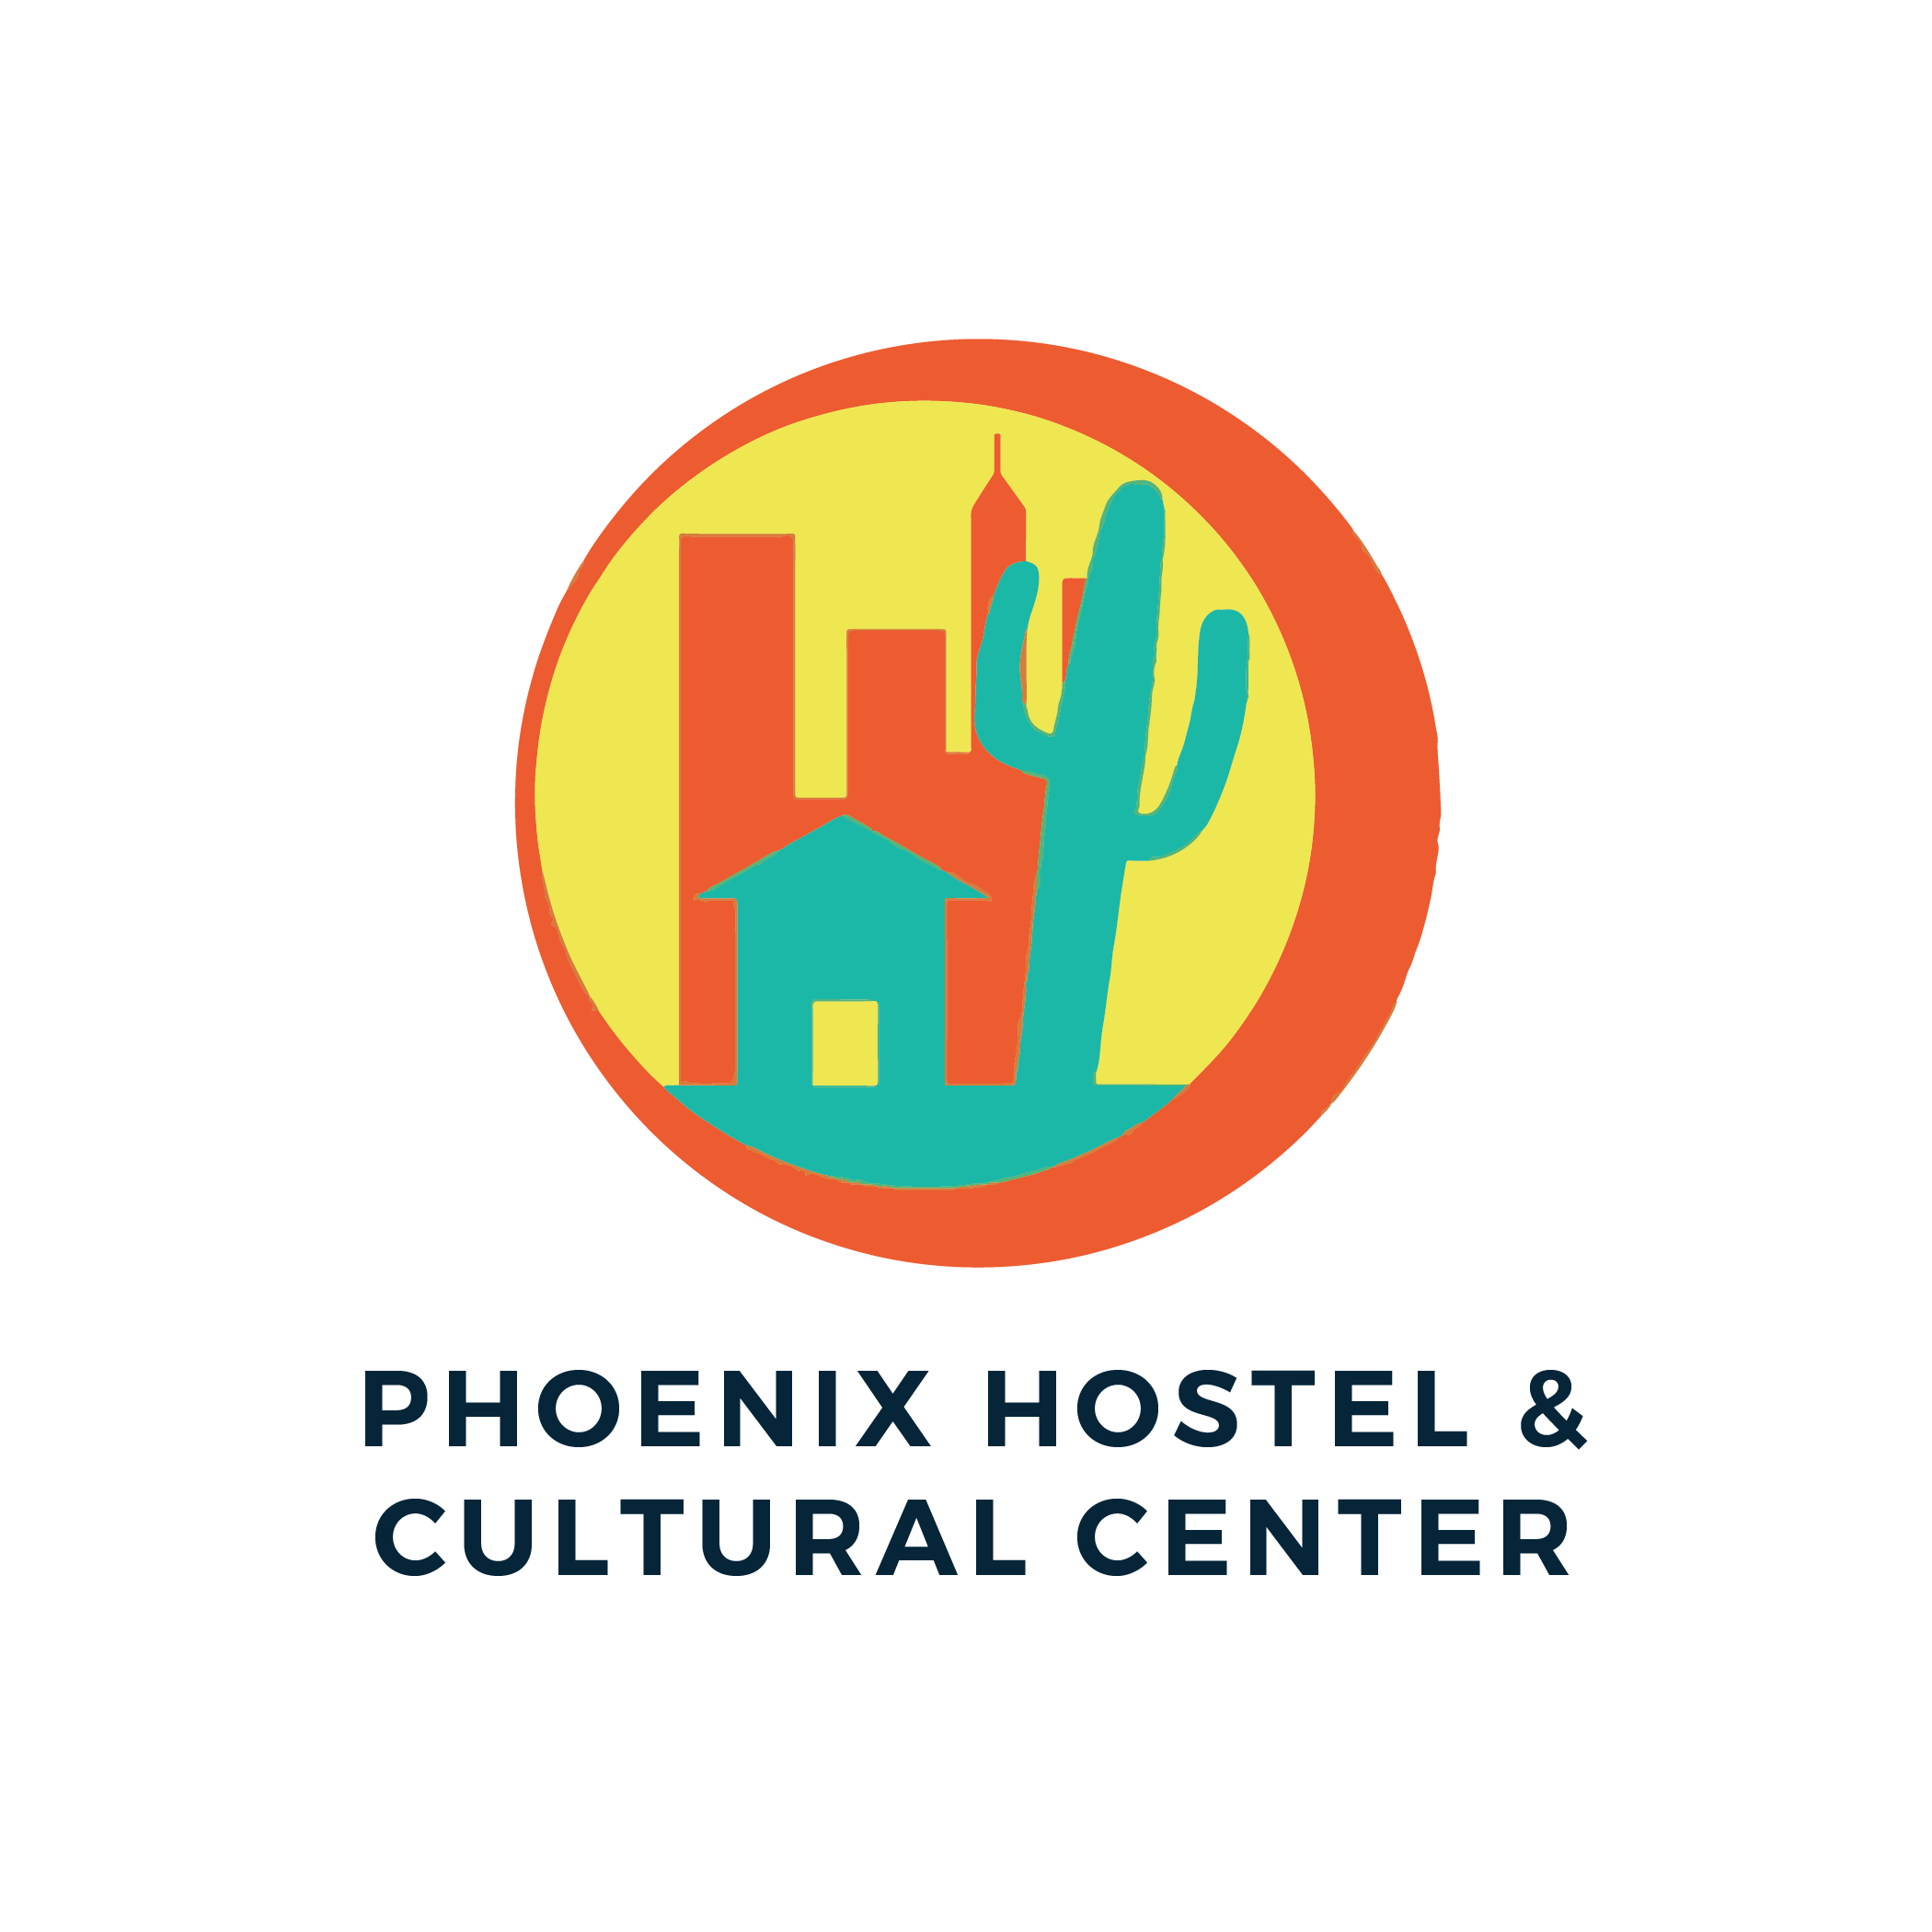 Phoenix Hostel and cultural center-01.png